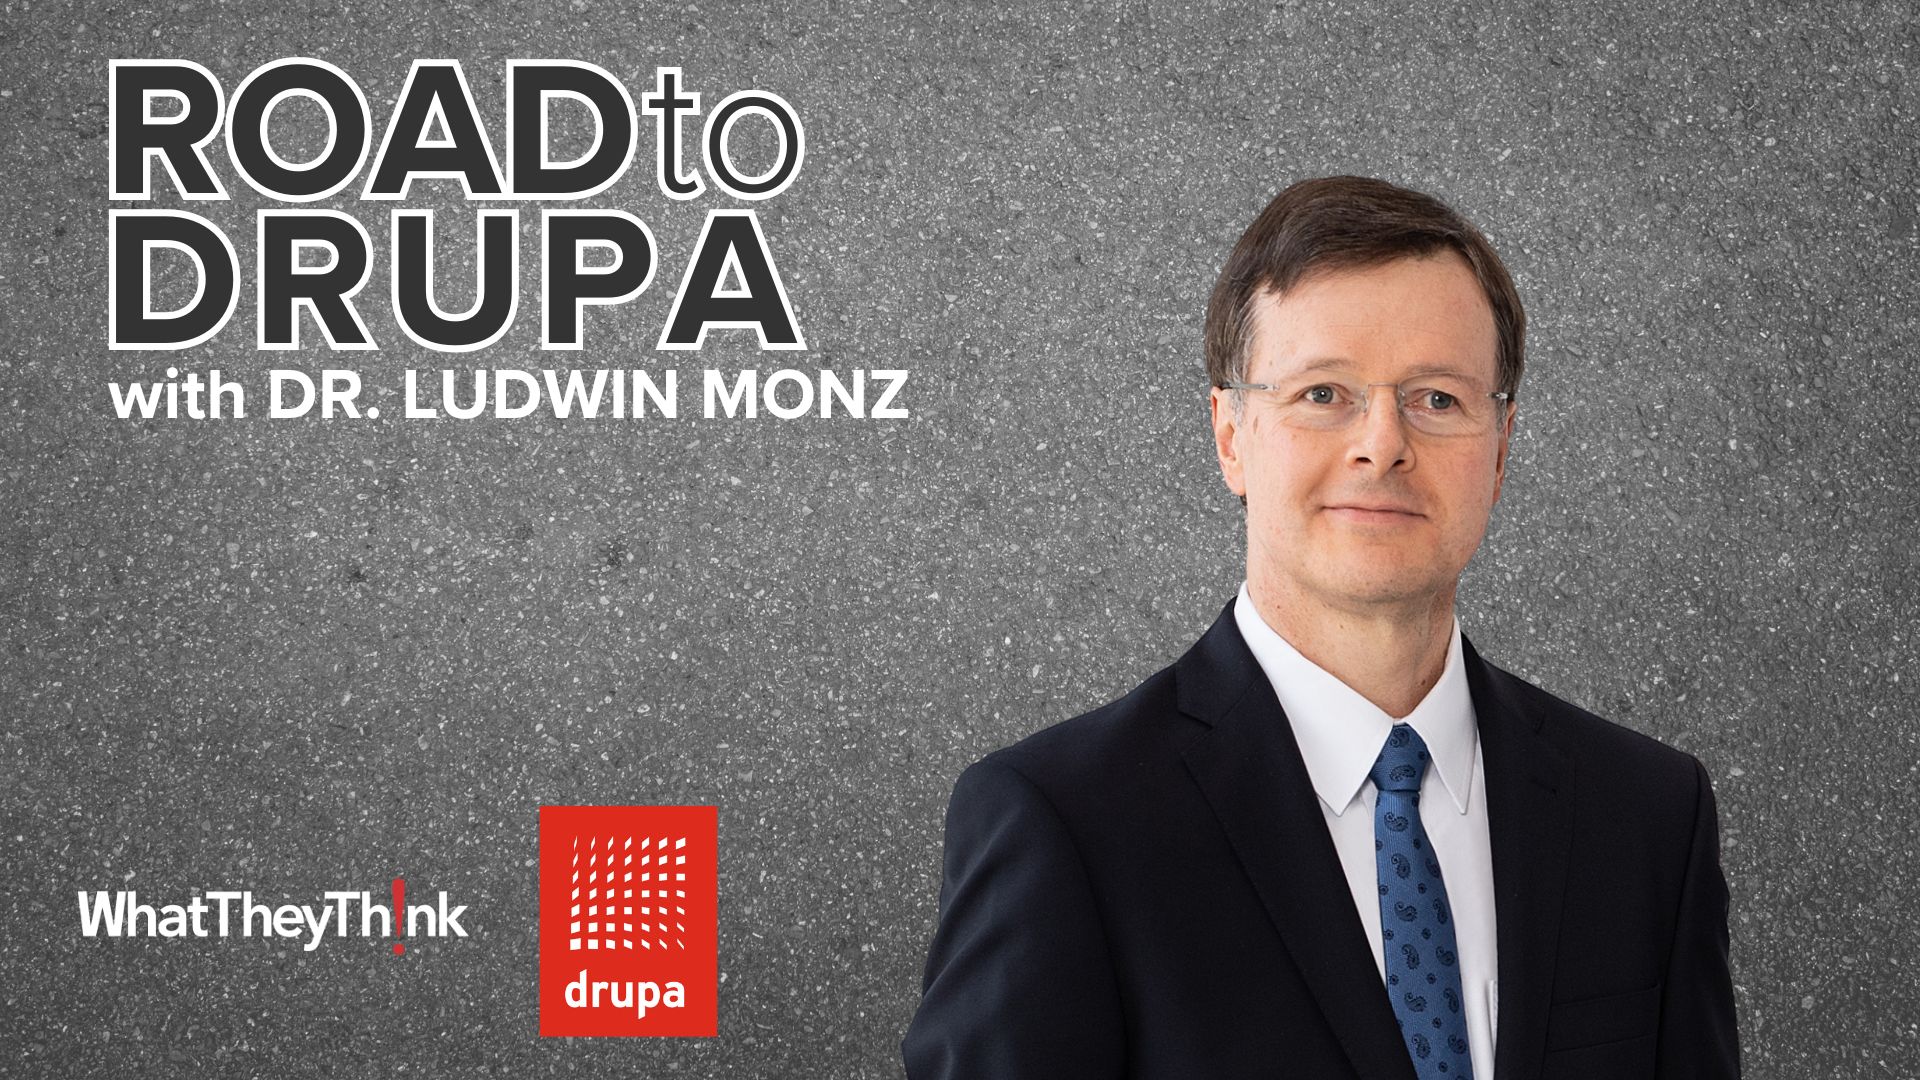 The Road to drupa: HEIDELBERG CEO Dr. Ludwin Monz on drupa 2024